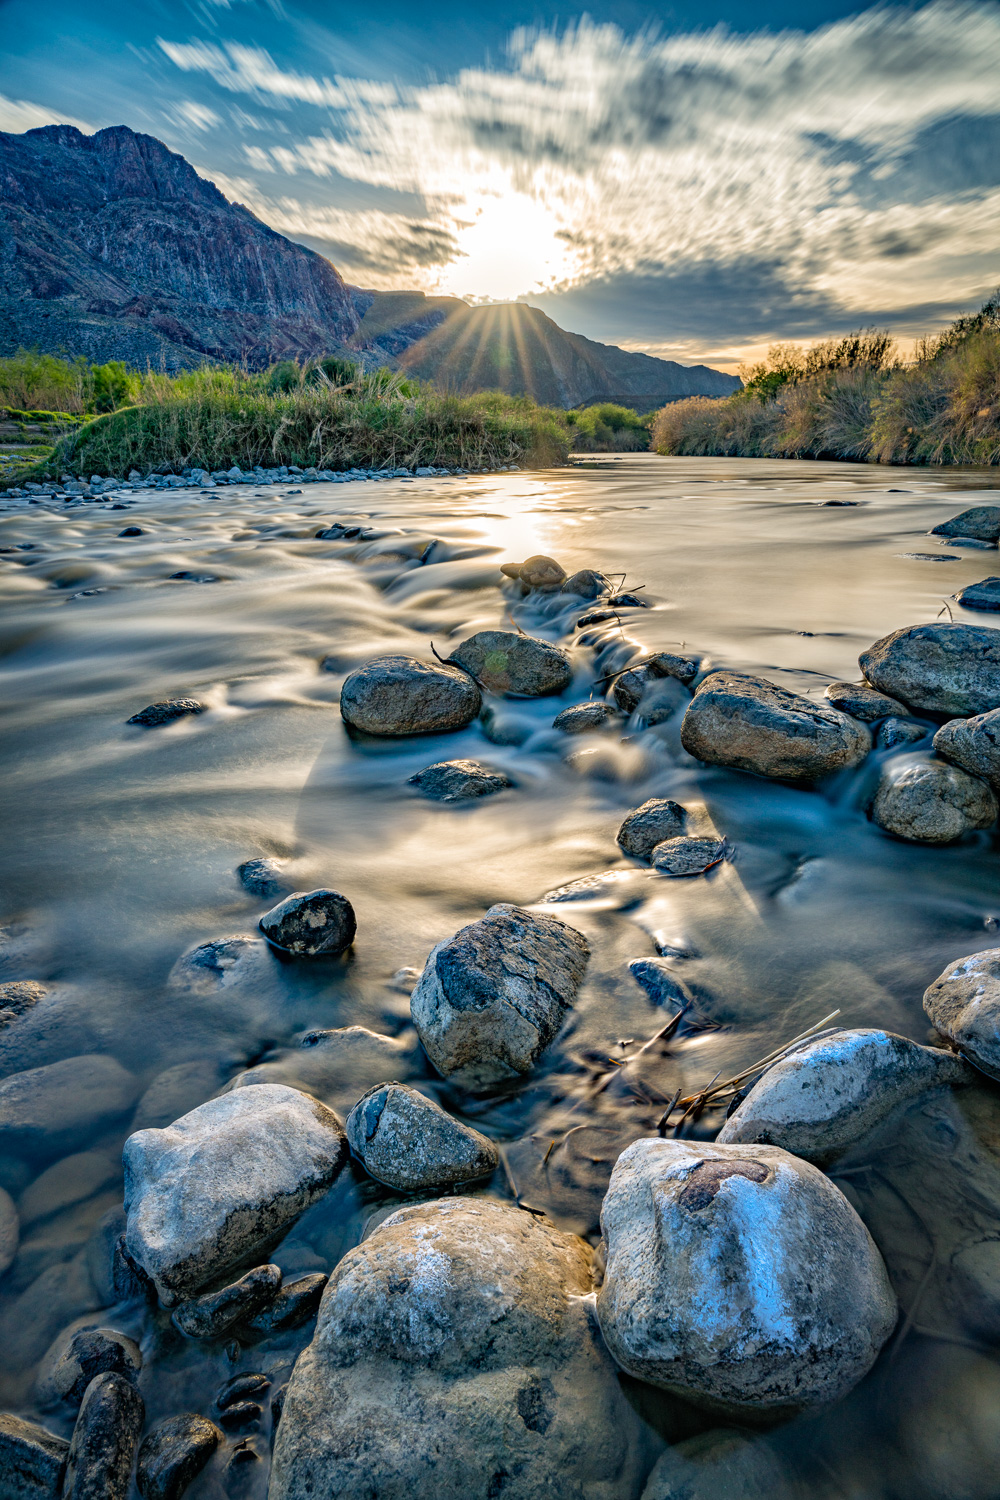 Big Bend Ranch State Park, LE, La Cuesta River Access, Long Exposure, Long Exposure Photography, ND Filters, Silky Water, Time Lapse